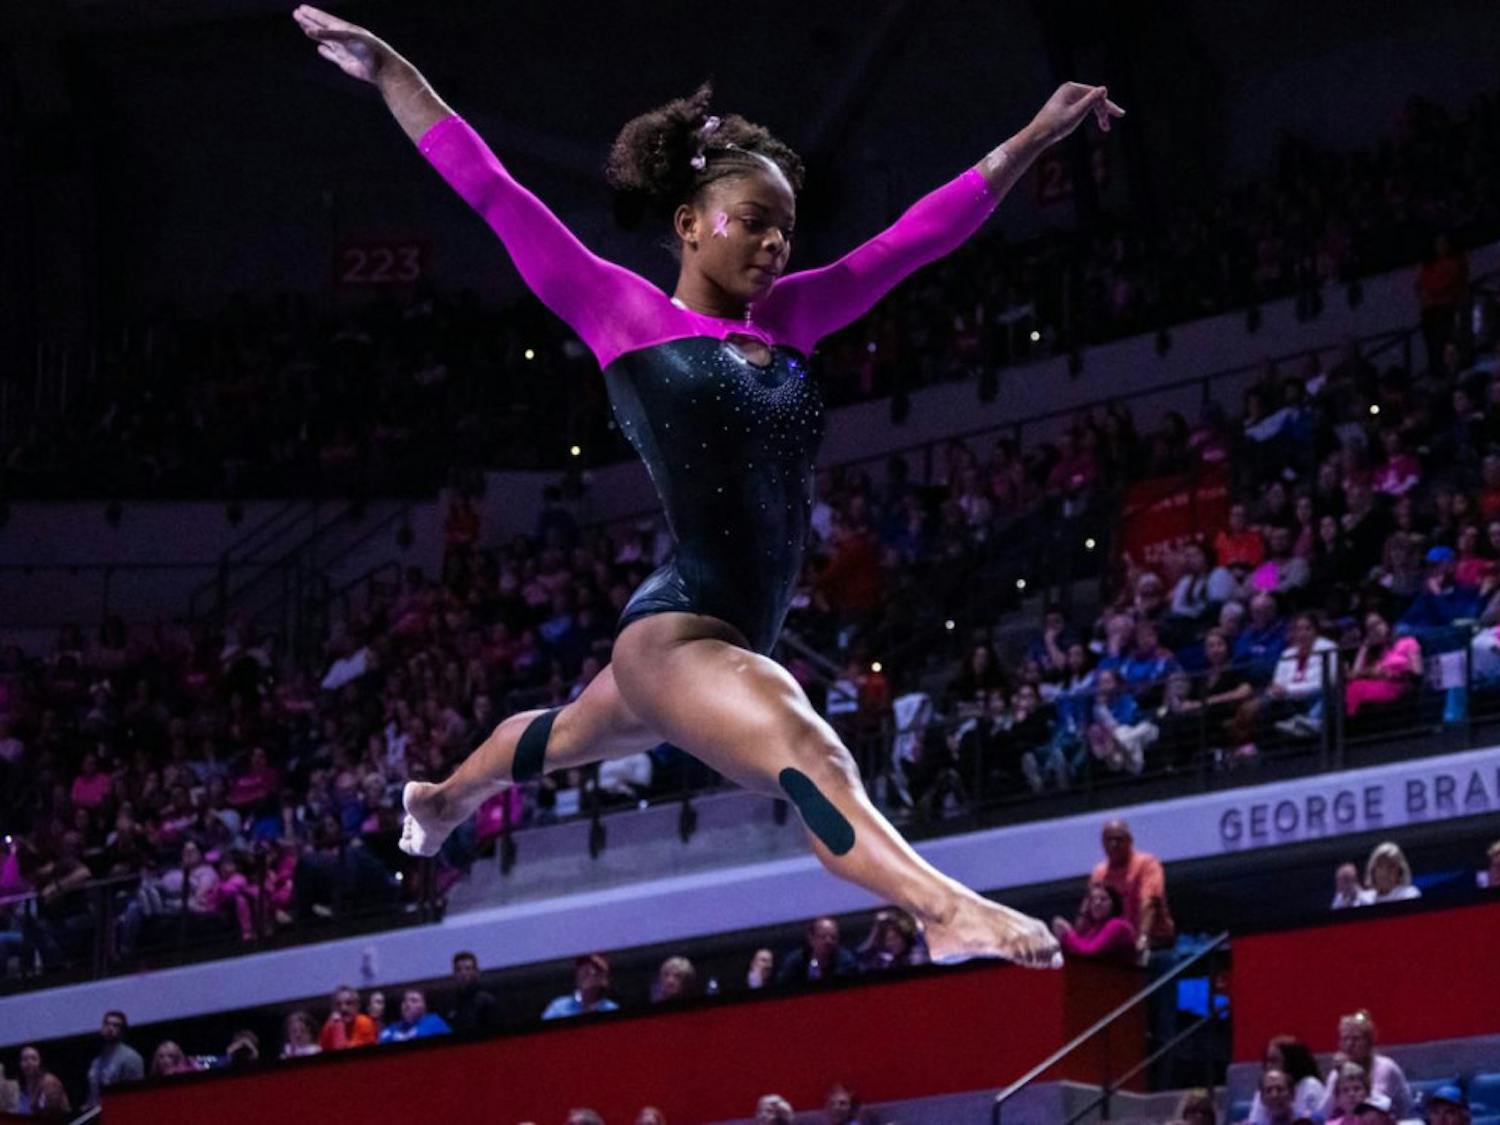 The team is led by junior standout Trinity Thomas, pictured above. She  was a finalist for the Honda Award, which is given to the best collegiate gymnast in the country.